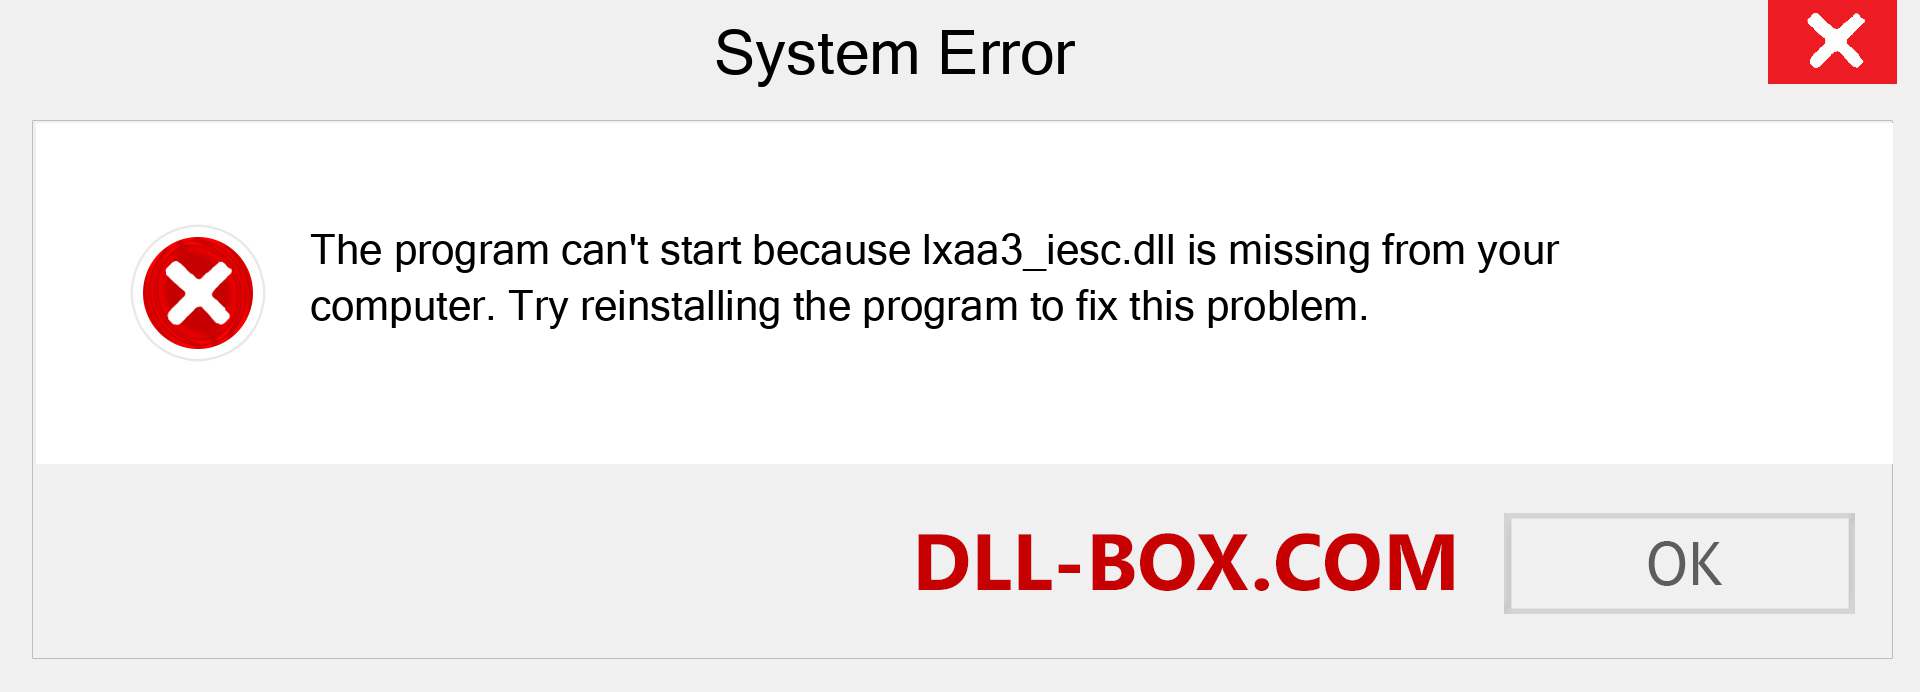  lxaa3_iesc.dll file is missing?. Download for Windows 7, 8, 10 - Fix  lxaa3_iesc dll Missing Error on Windows, photos, images